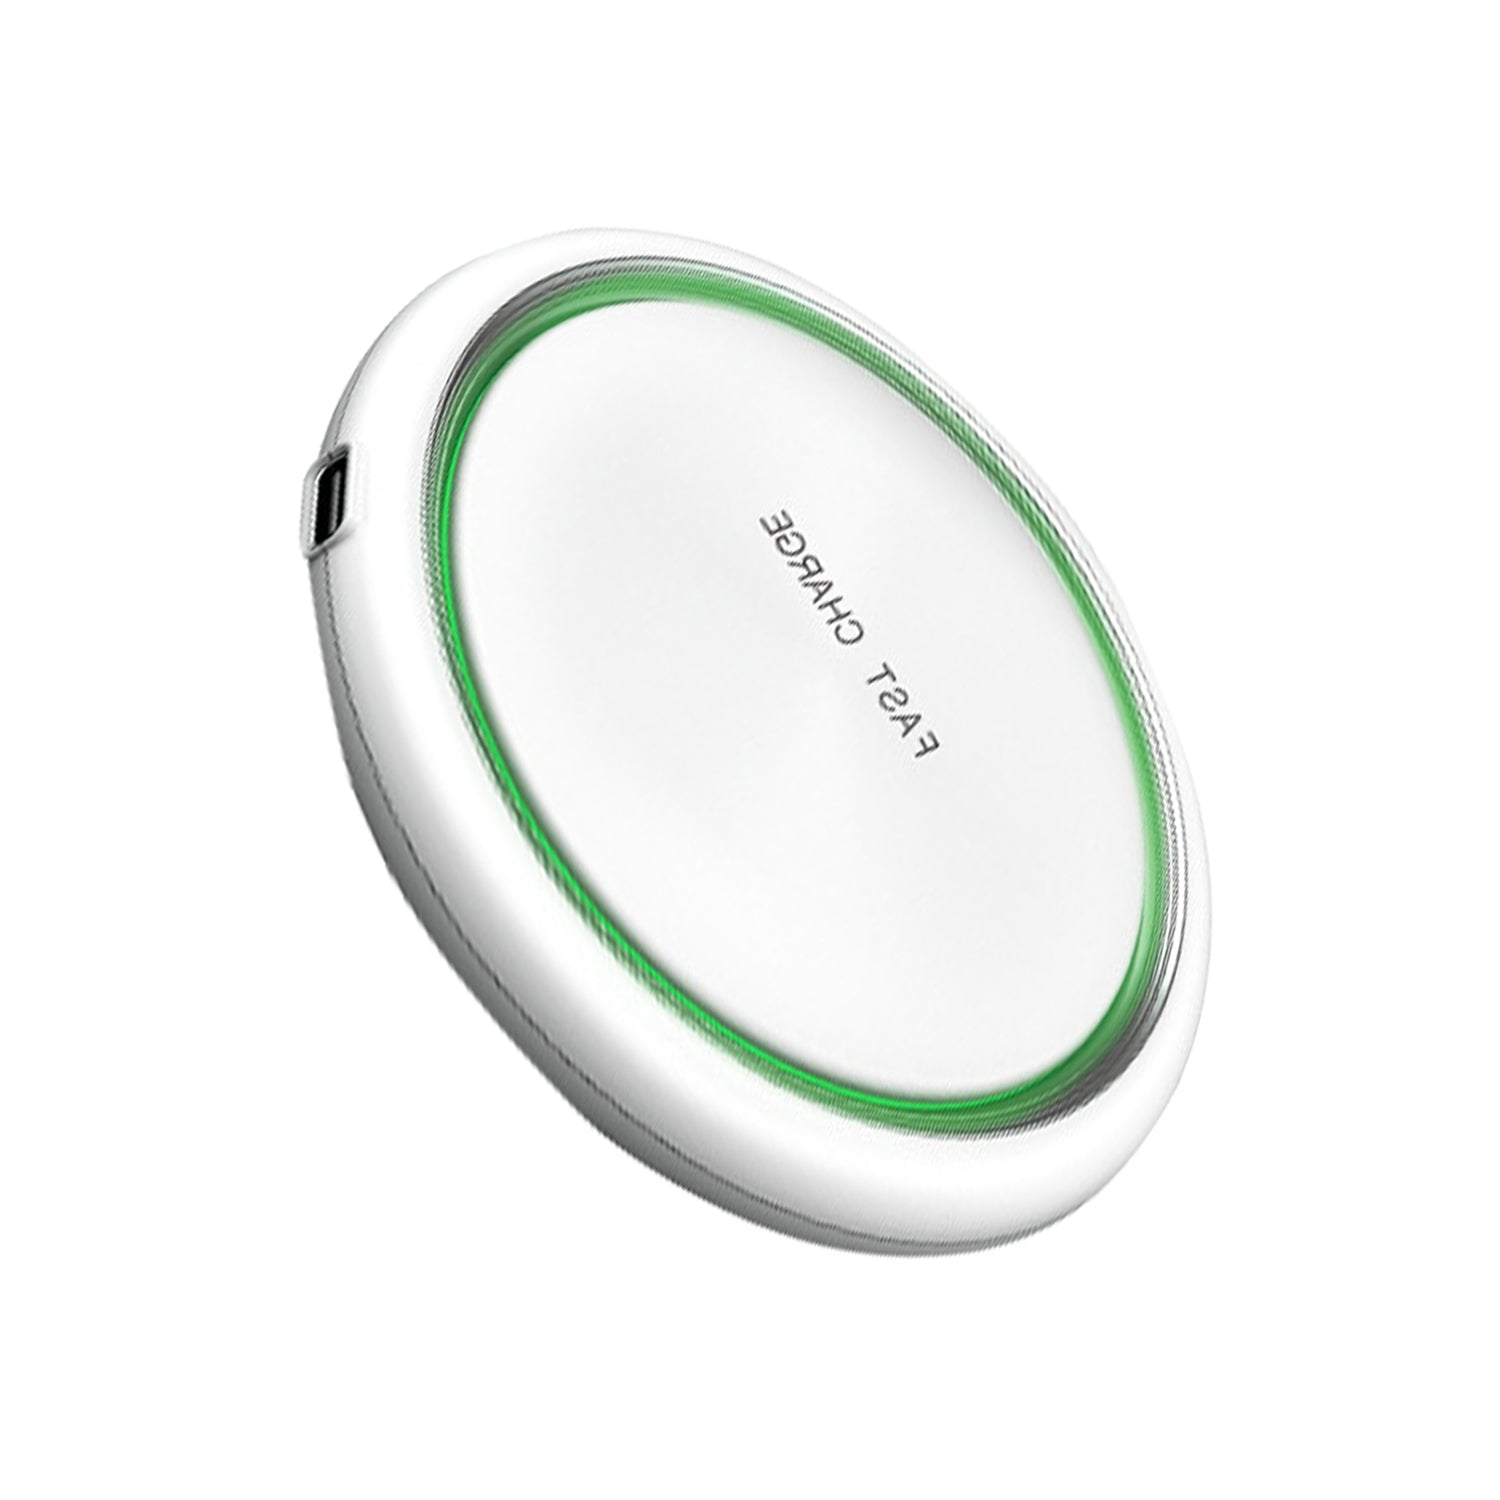 Wireless Charger, 10W Max Fast Wireless Charging